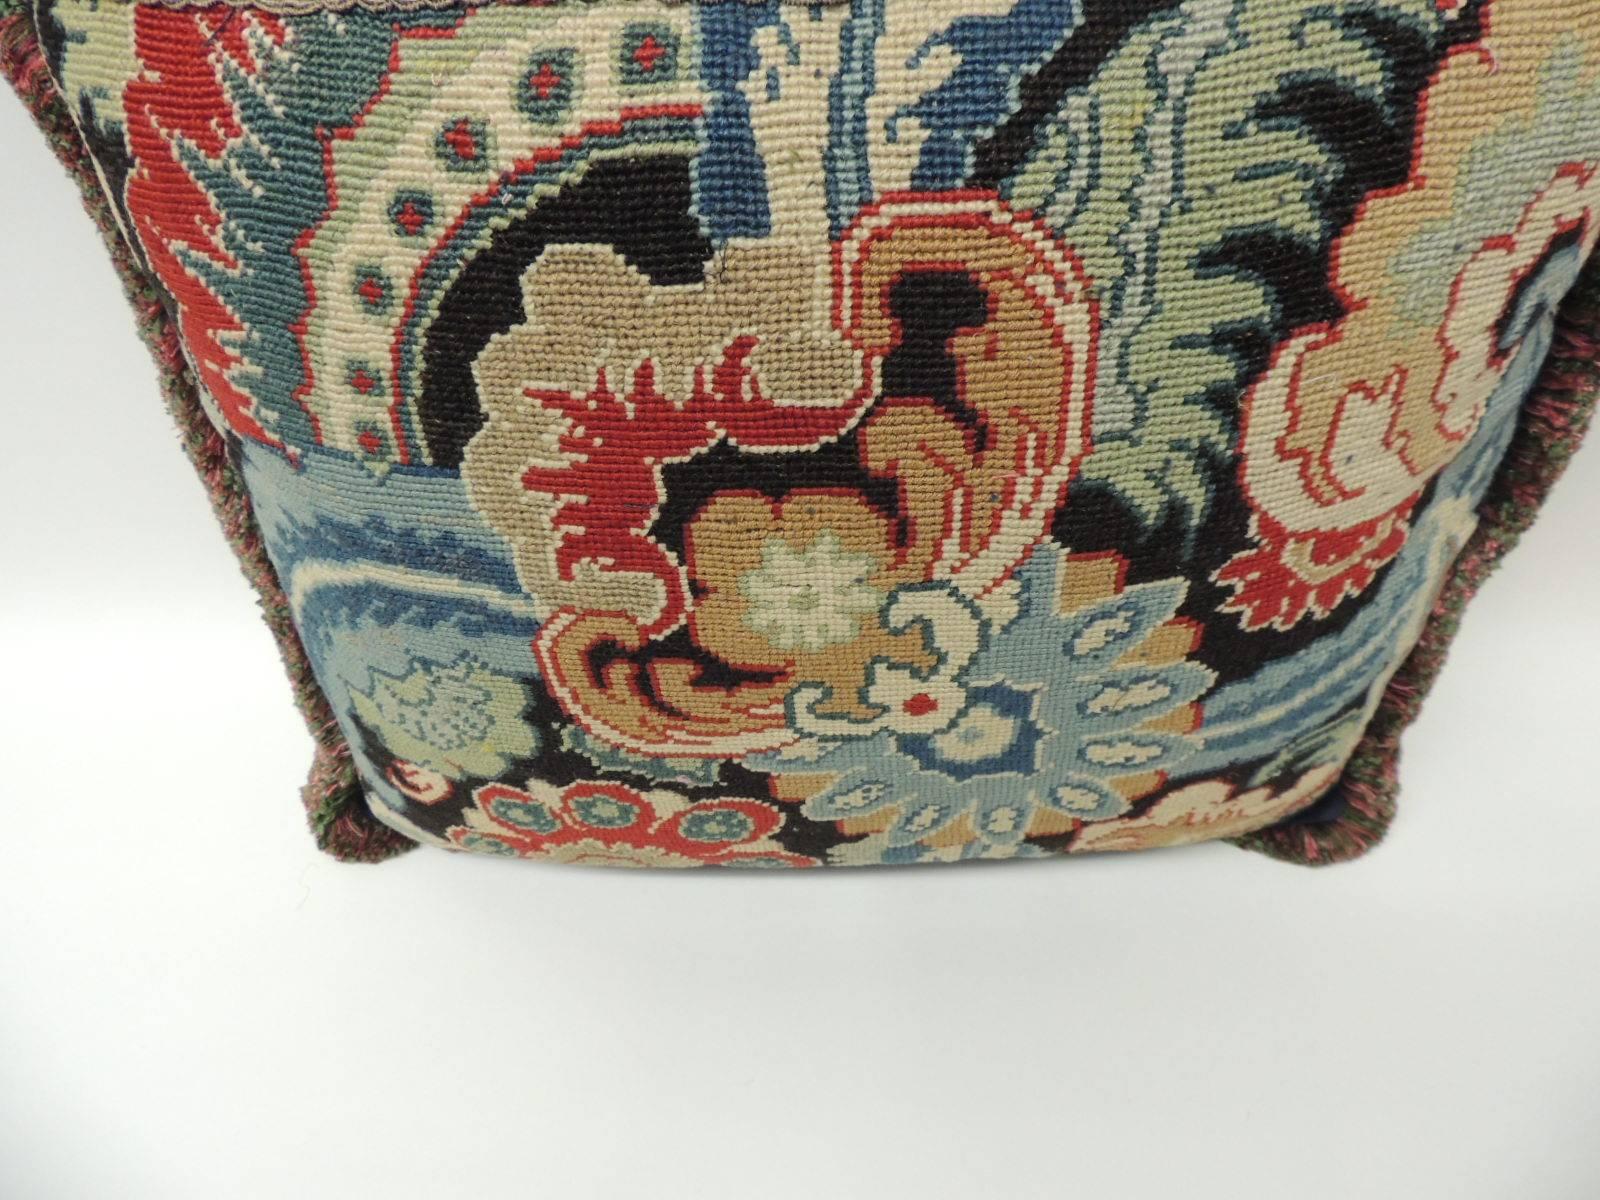 Hand-Crafted 18th Century French Needlework Tapestry Decorative Pillow